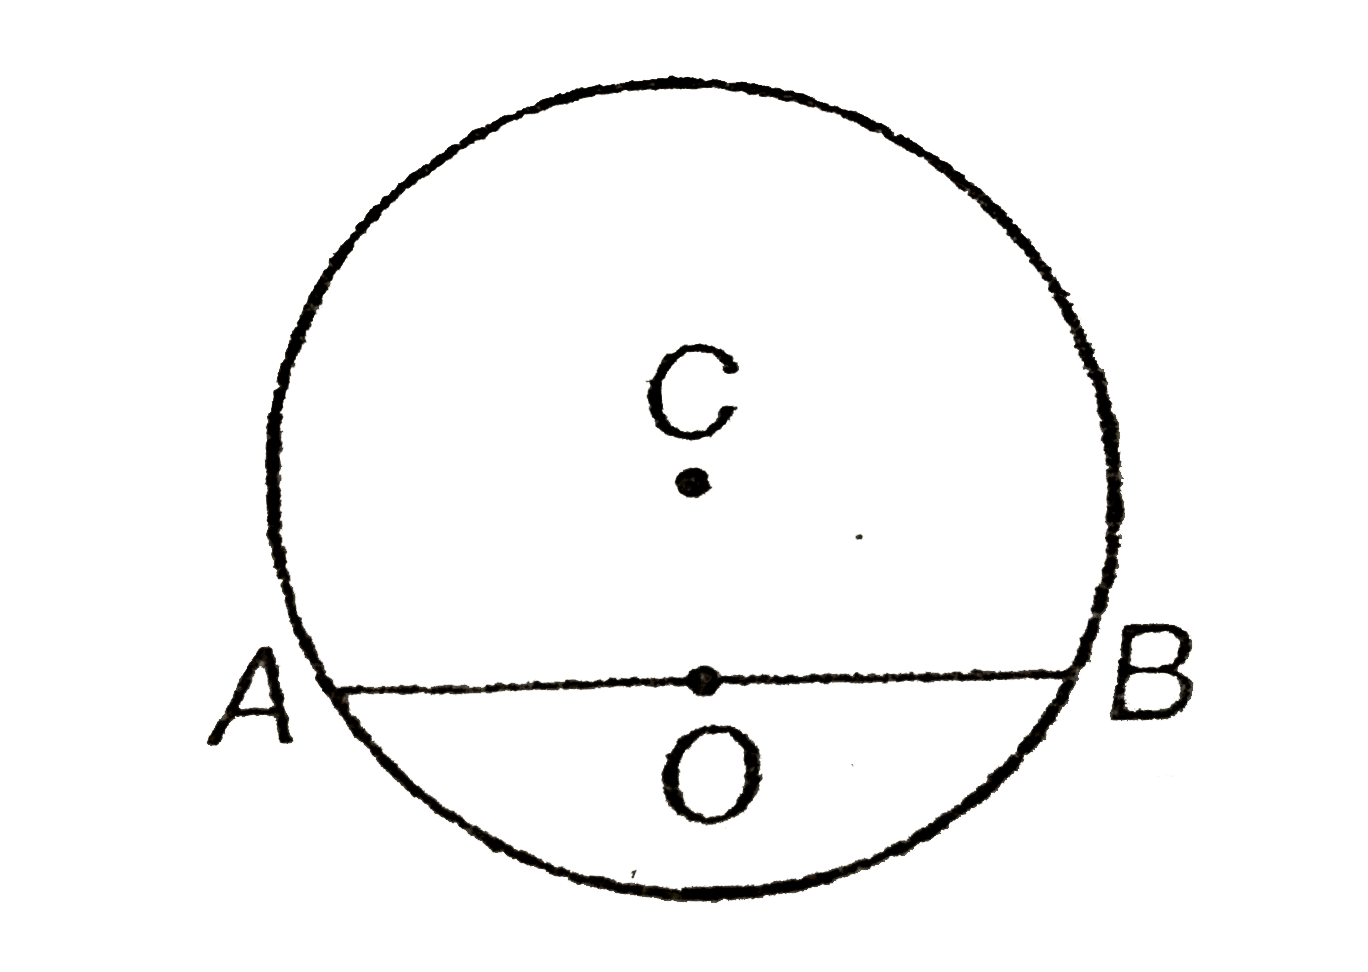 A disc of mass M and radius R as shown in figure has some points on it. C is the cenre of disc, AB is the chord and O is mid point of chord. The notation I(A) means moment of inertia of the disc about axis passing through point A and pependicular to the plane of disc. Choose the correct option(s)